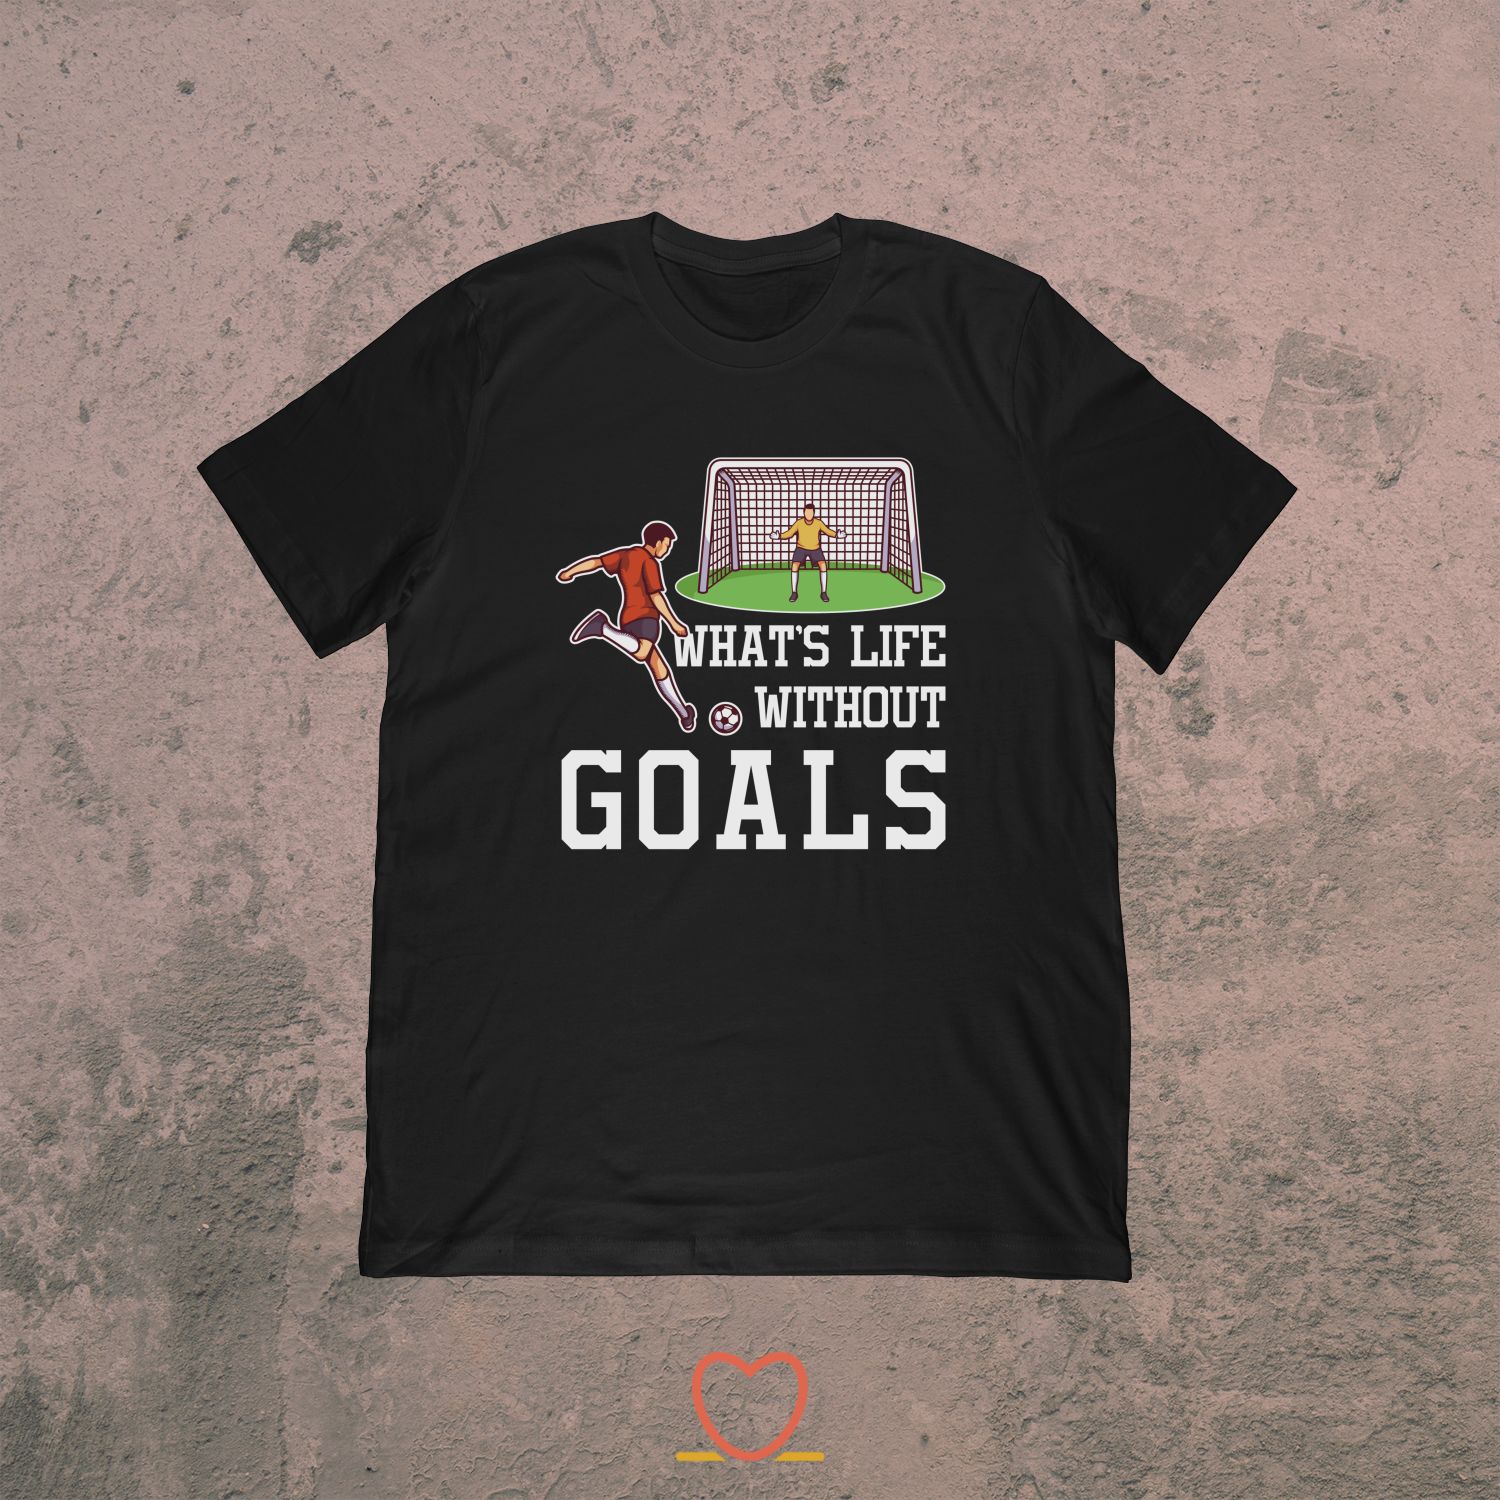 What’s Life Without Goals – Funny Soccer Tee